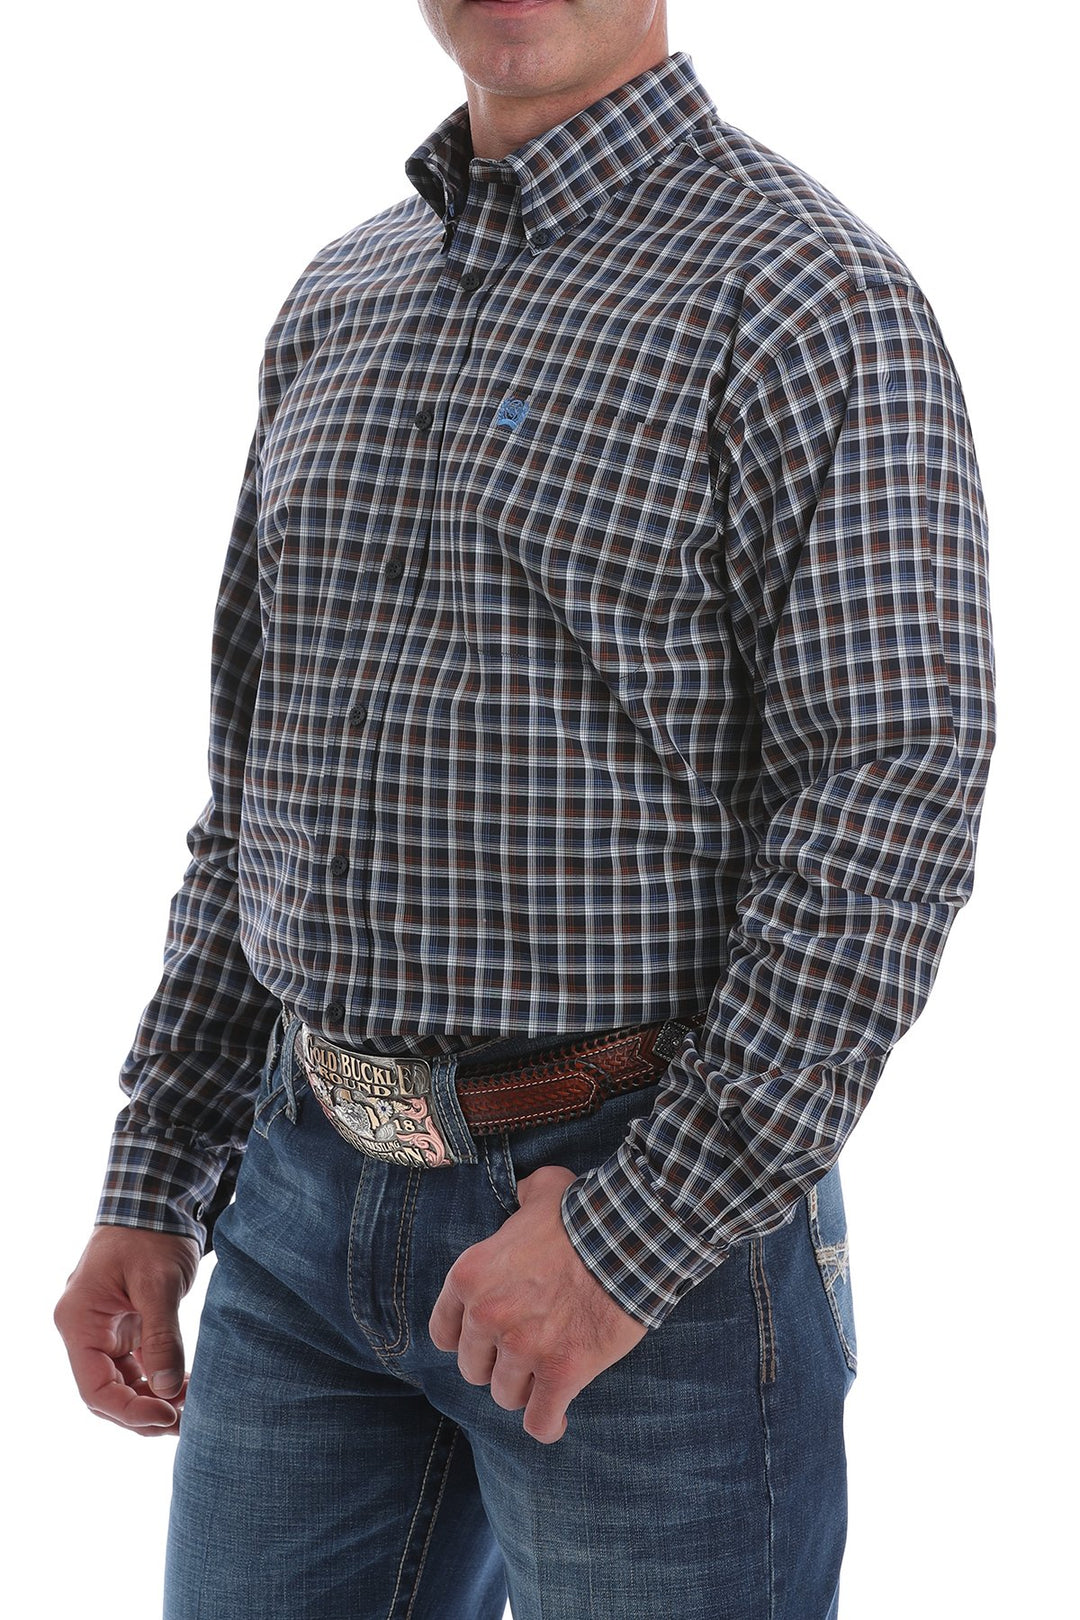 Cinch Men's Button-Down Western Shirt-Navy, White and Brown